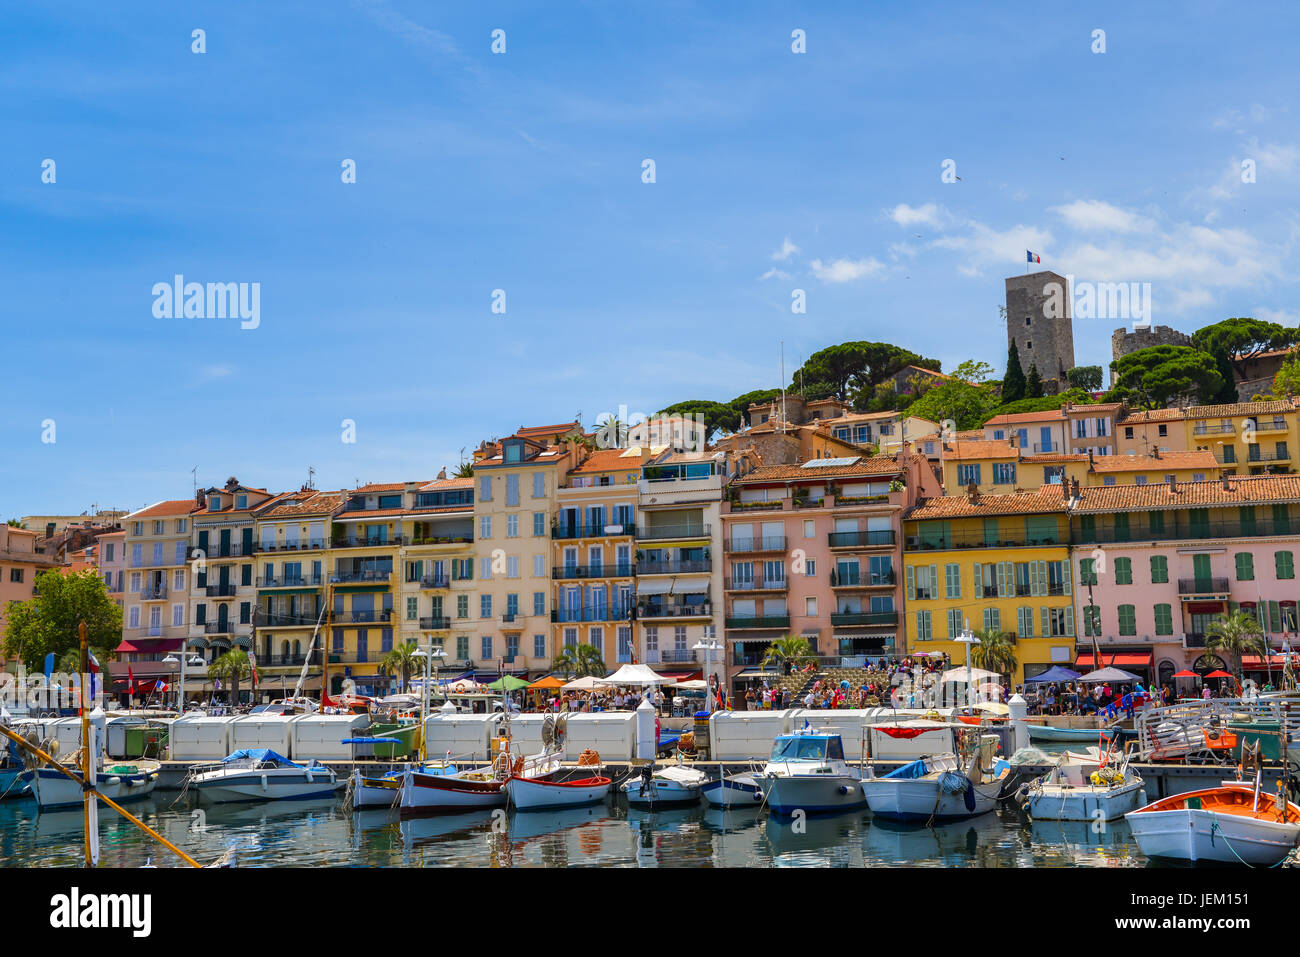 Europe, France, Alpes-Maritimes, Cannes. The old town and the old port Stock Photo